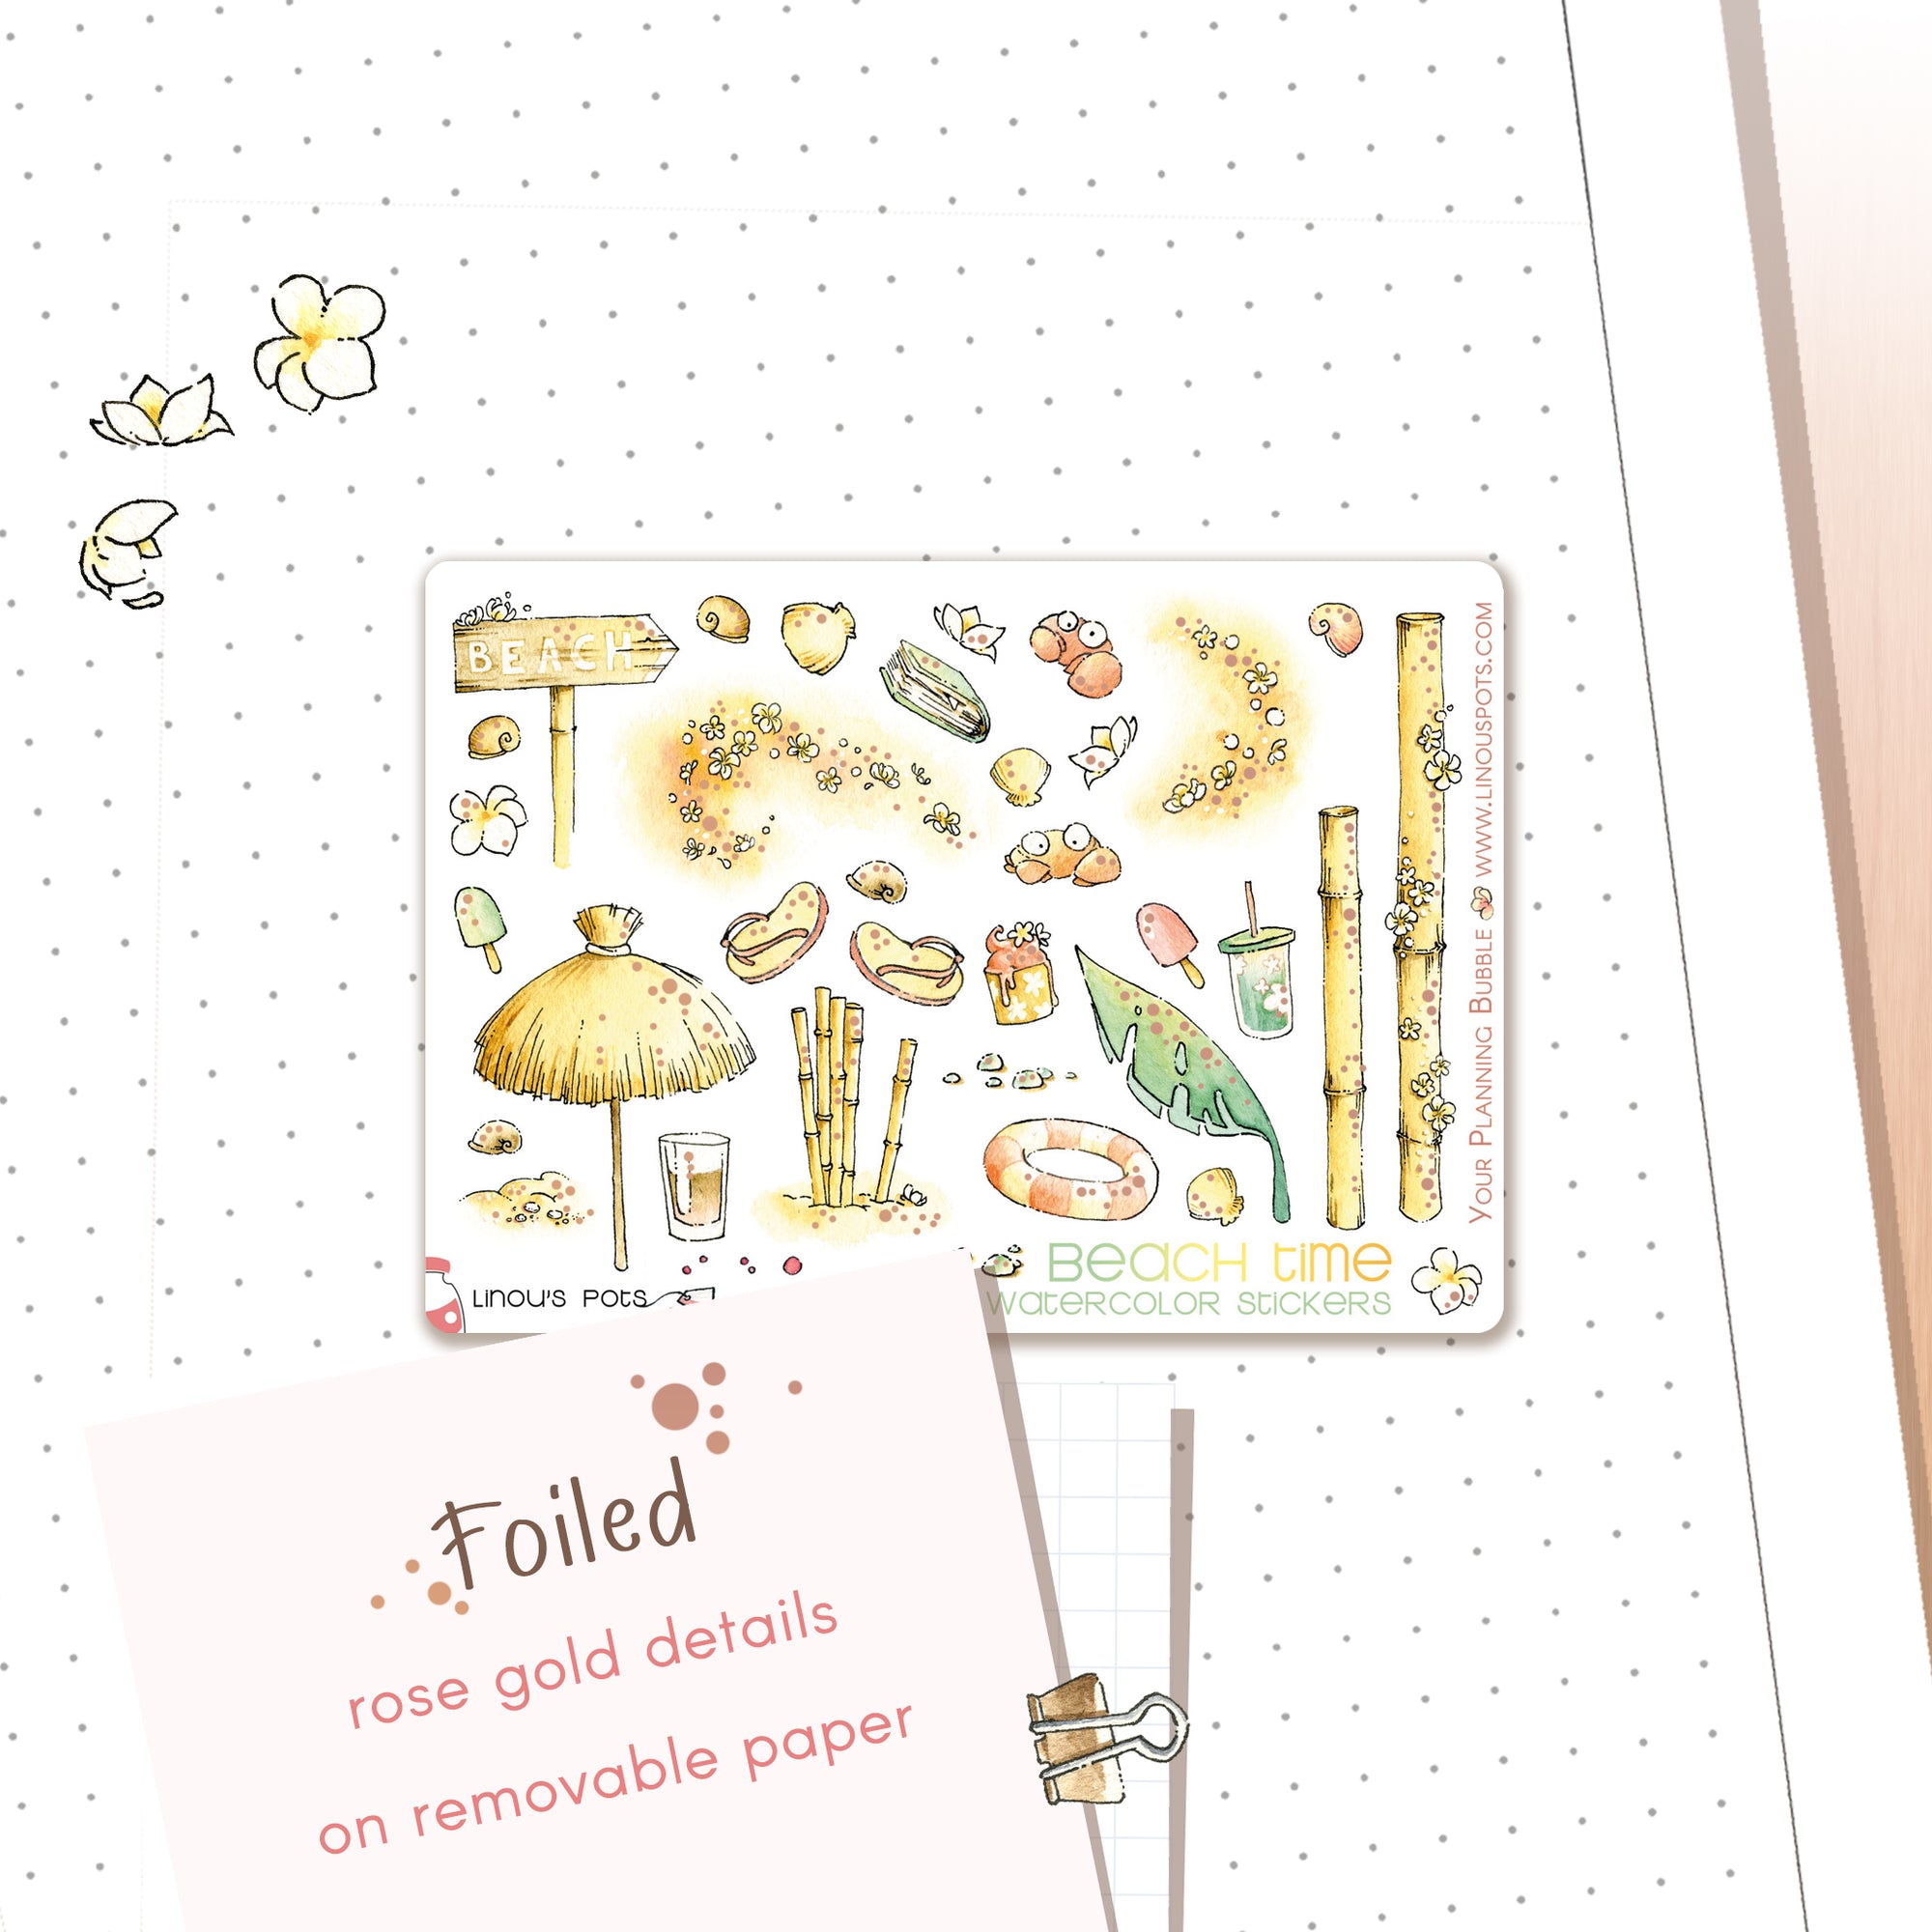 Beach watercolor stickers with foiled